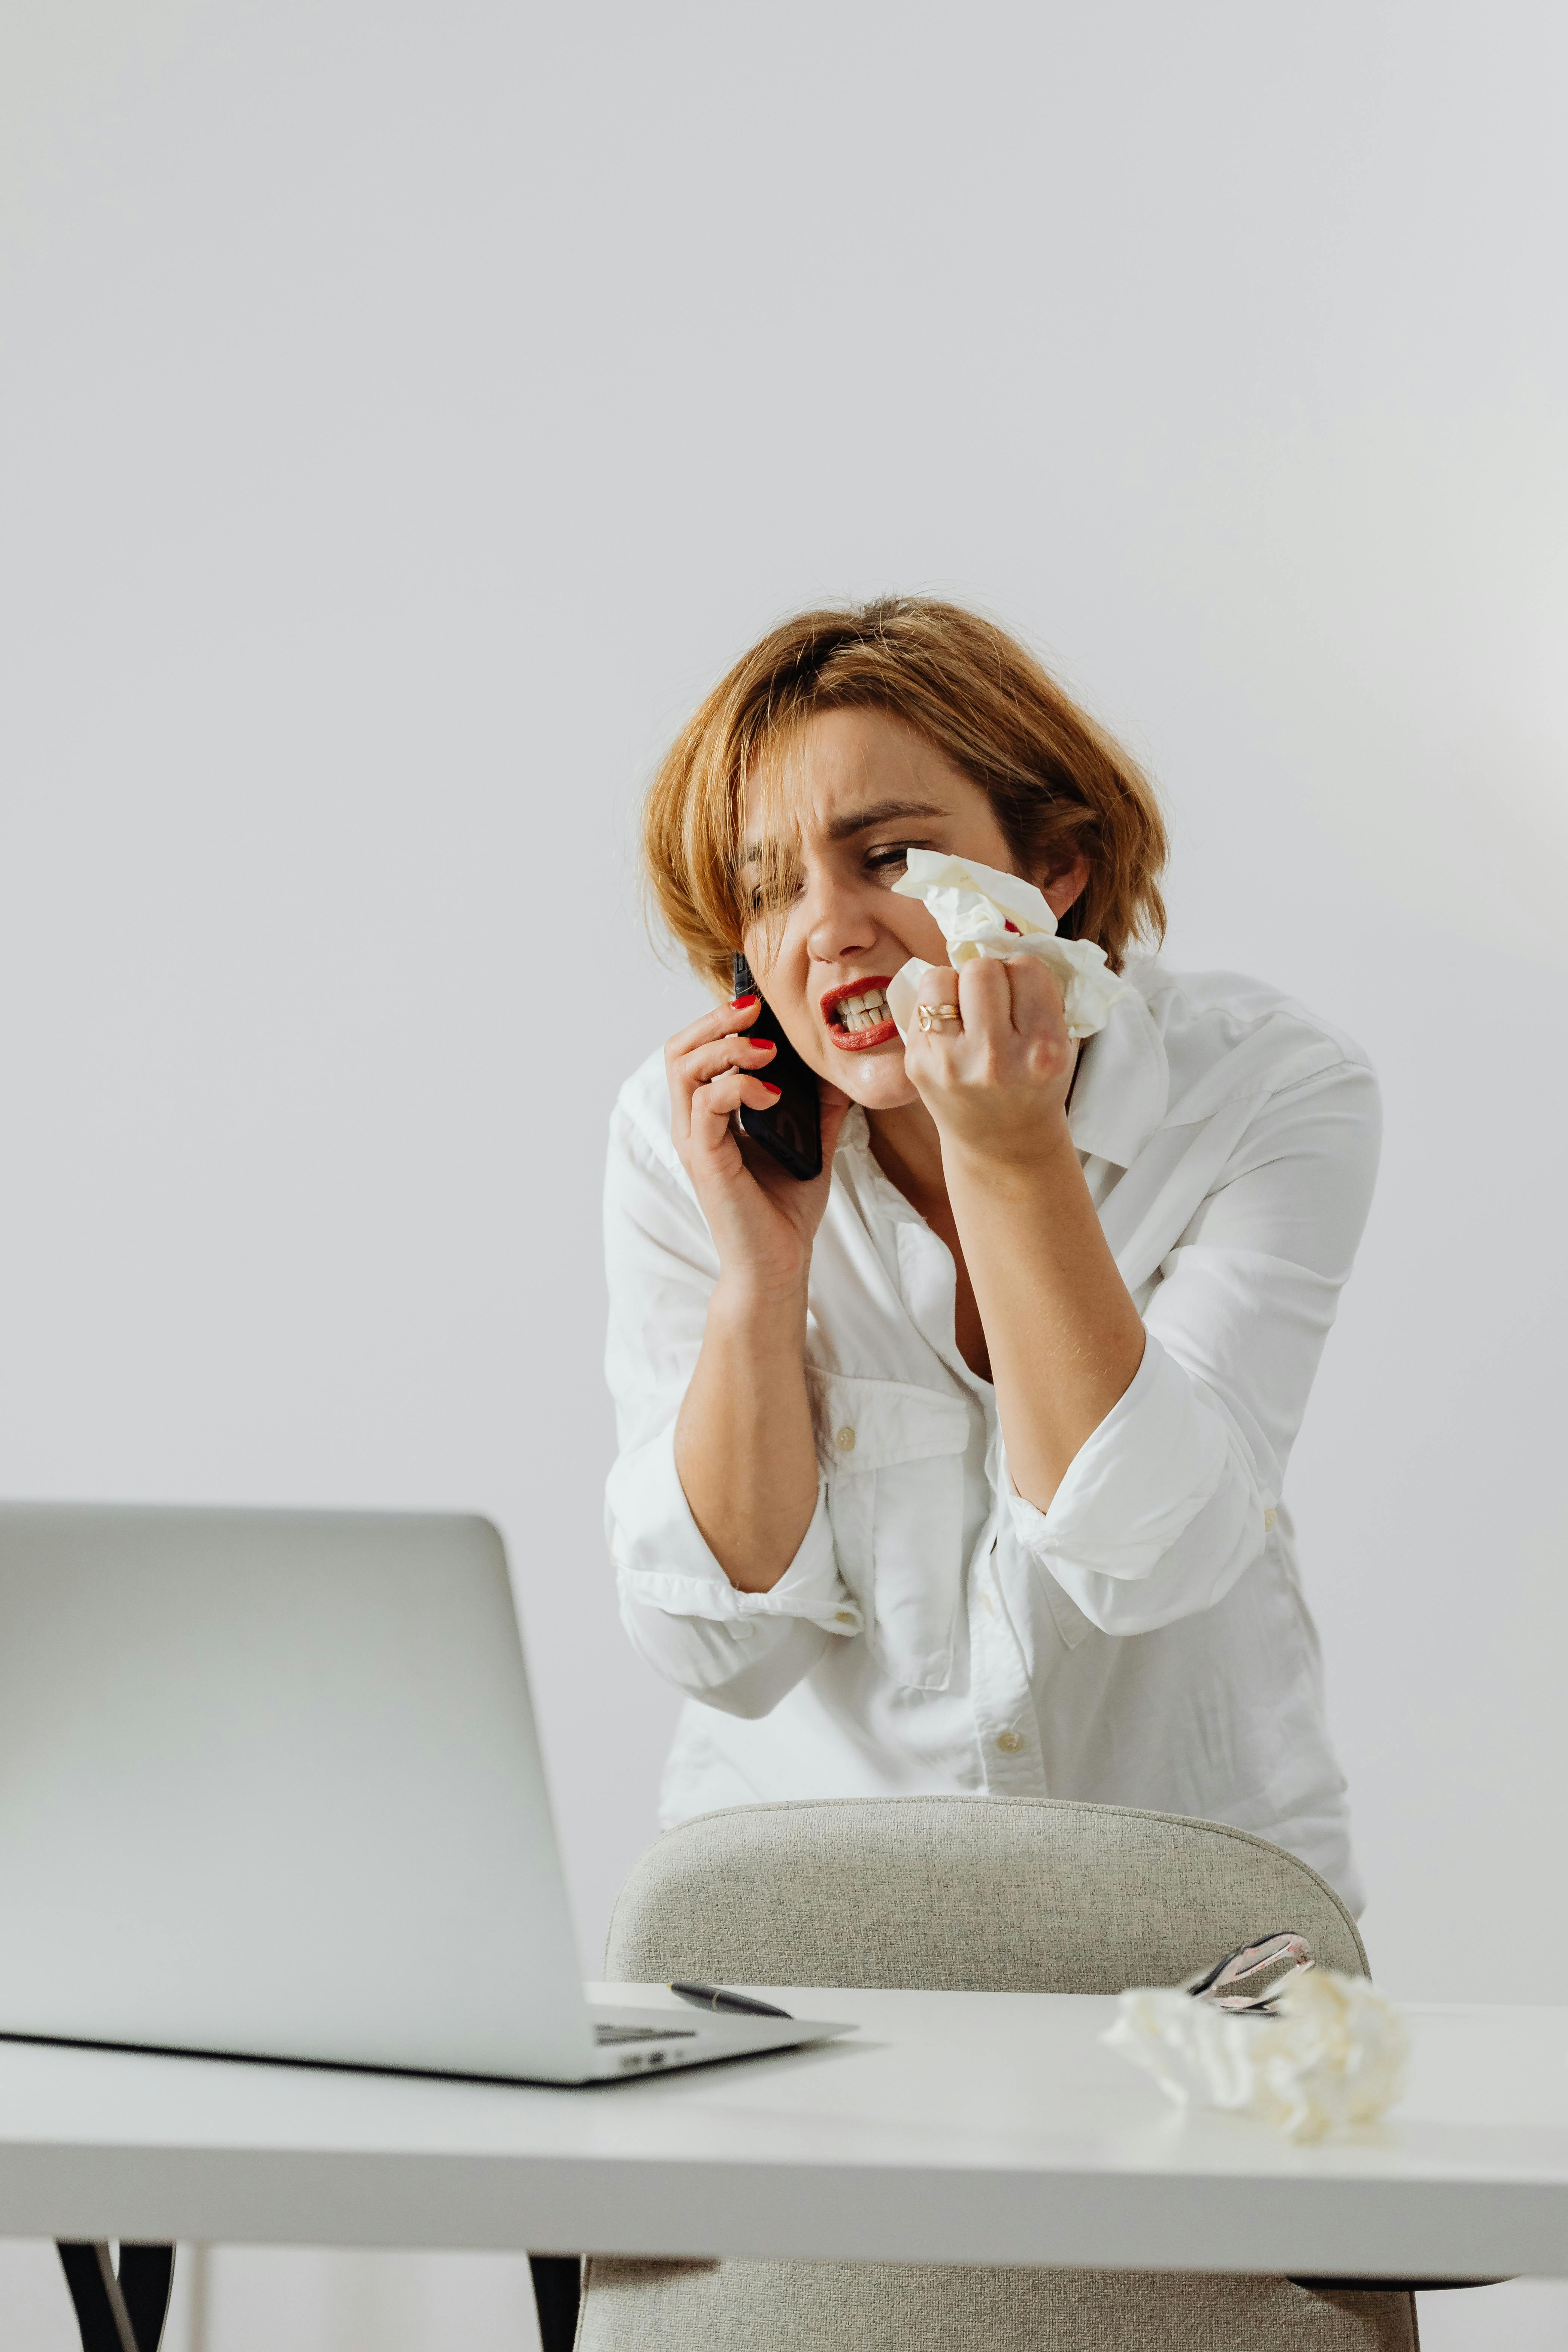 Woman cries on her phone in front of her laptop | Source: Pexels